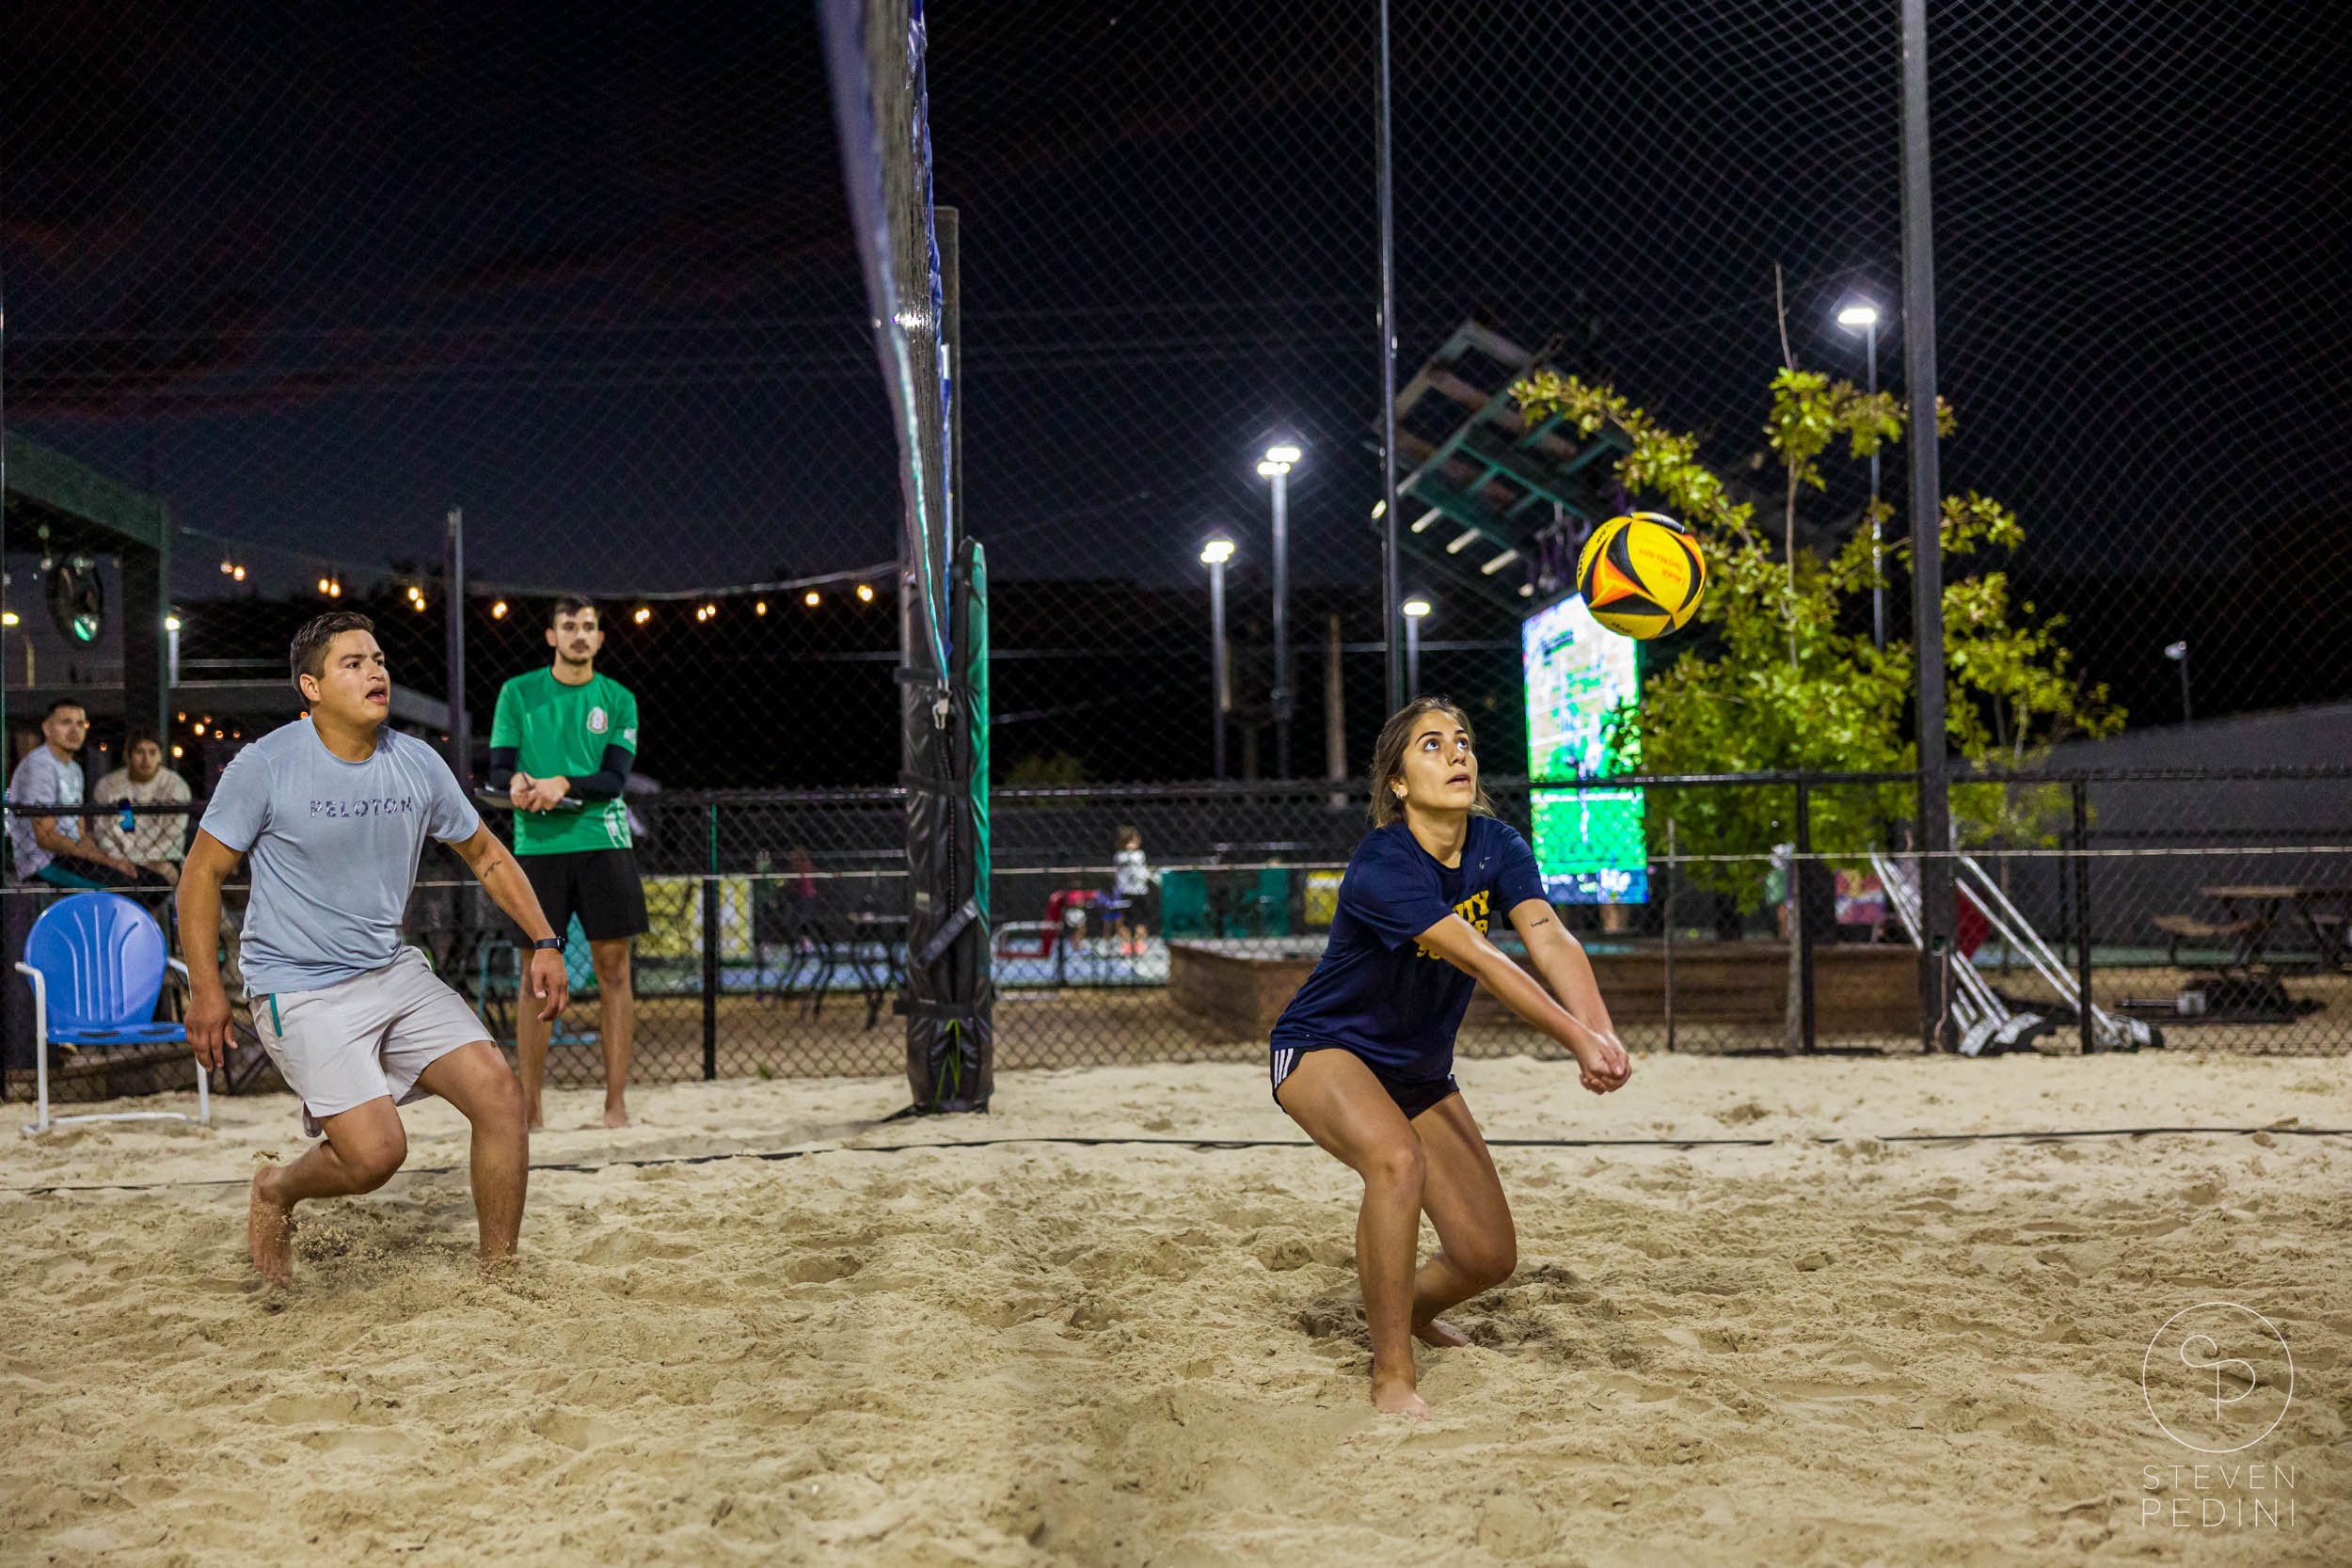 Steven Pedini Photography - Bumpy Pickle - Sand Volleyball - Houston TX - World Cup of Volleyball - 00379.jpg